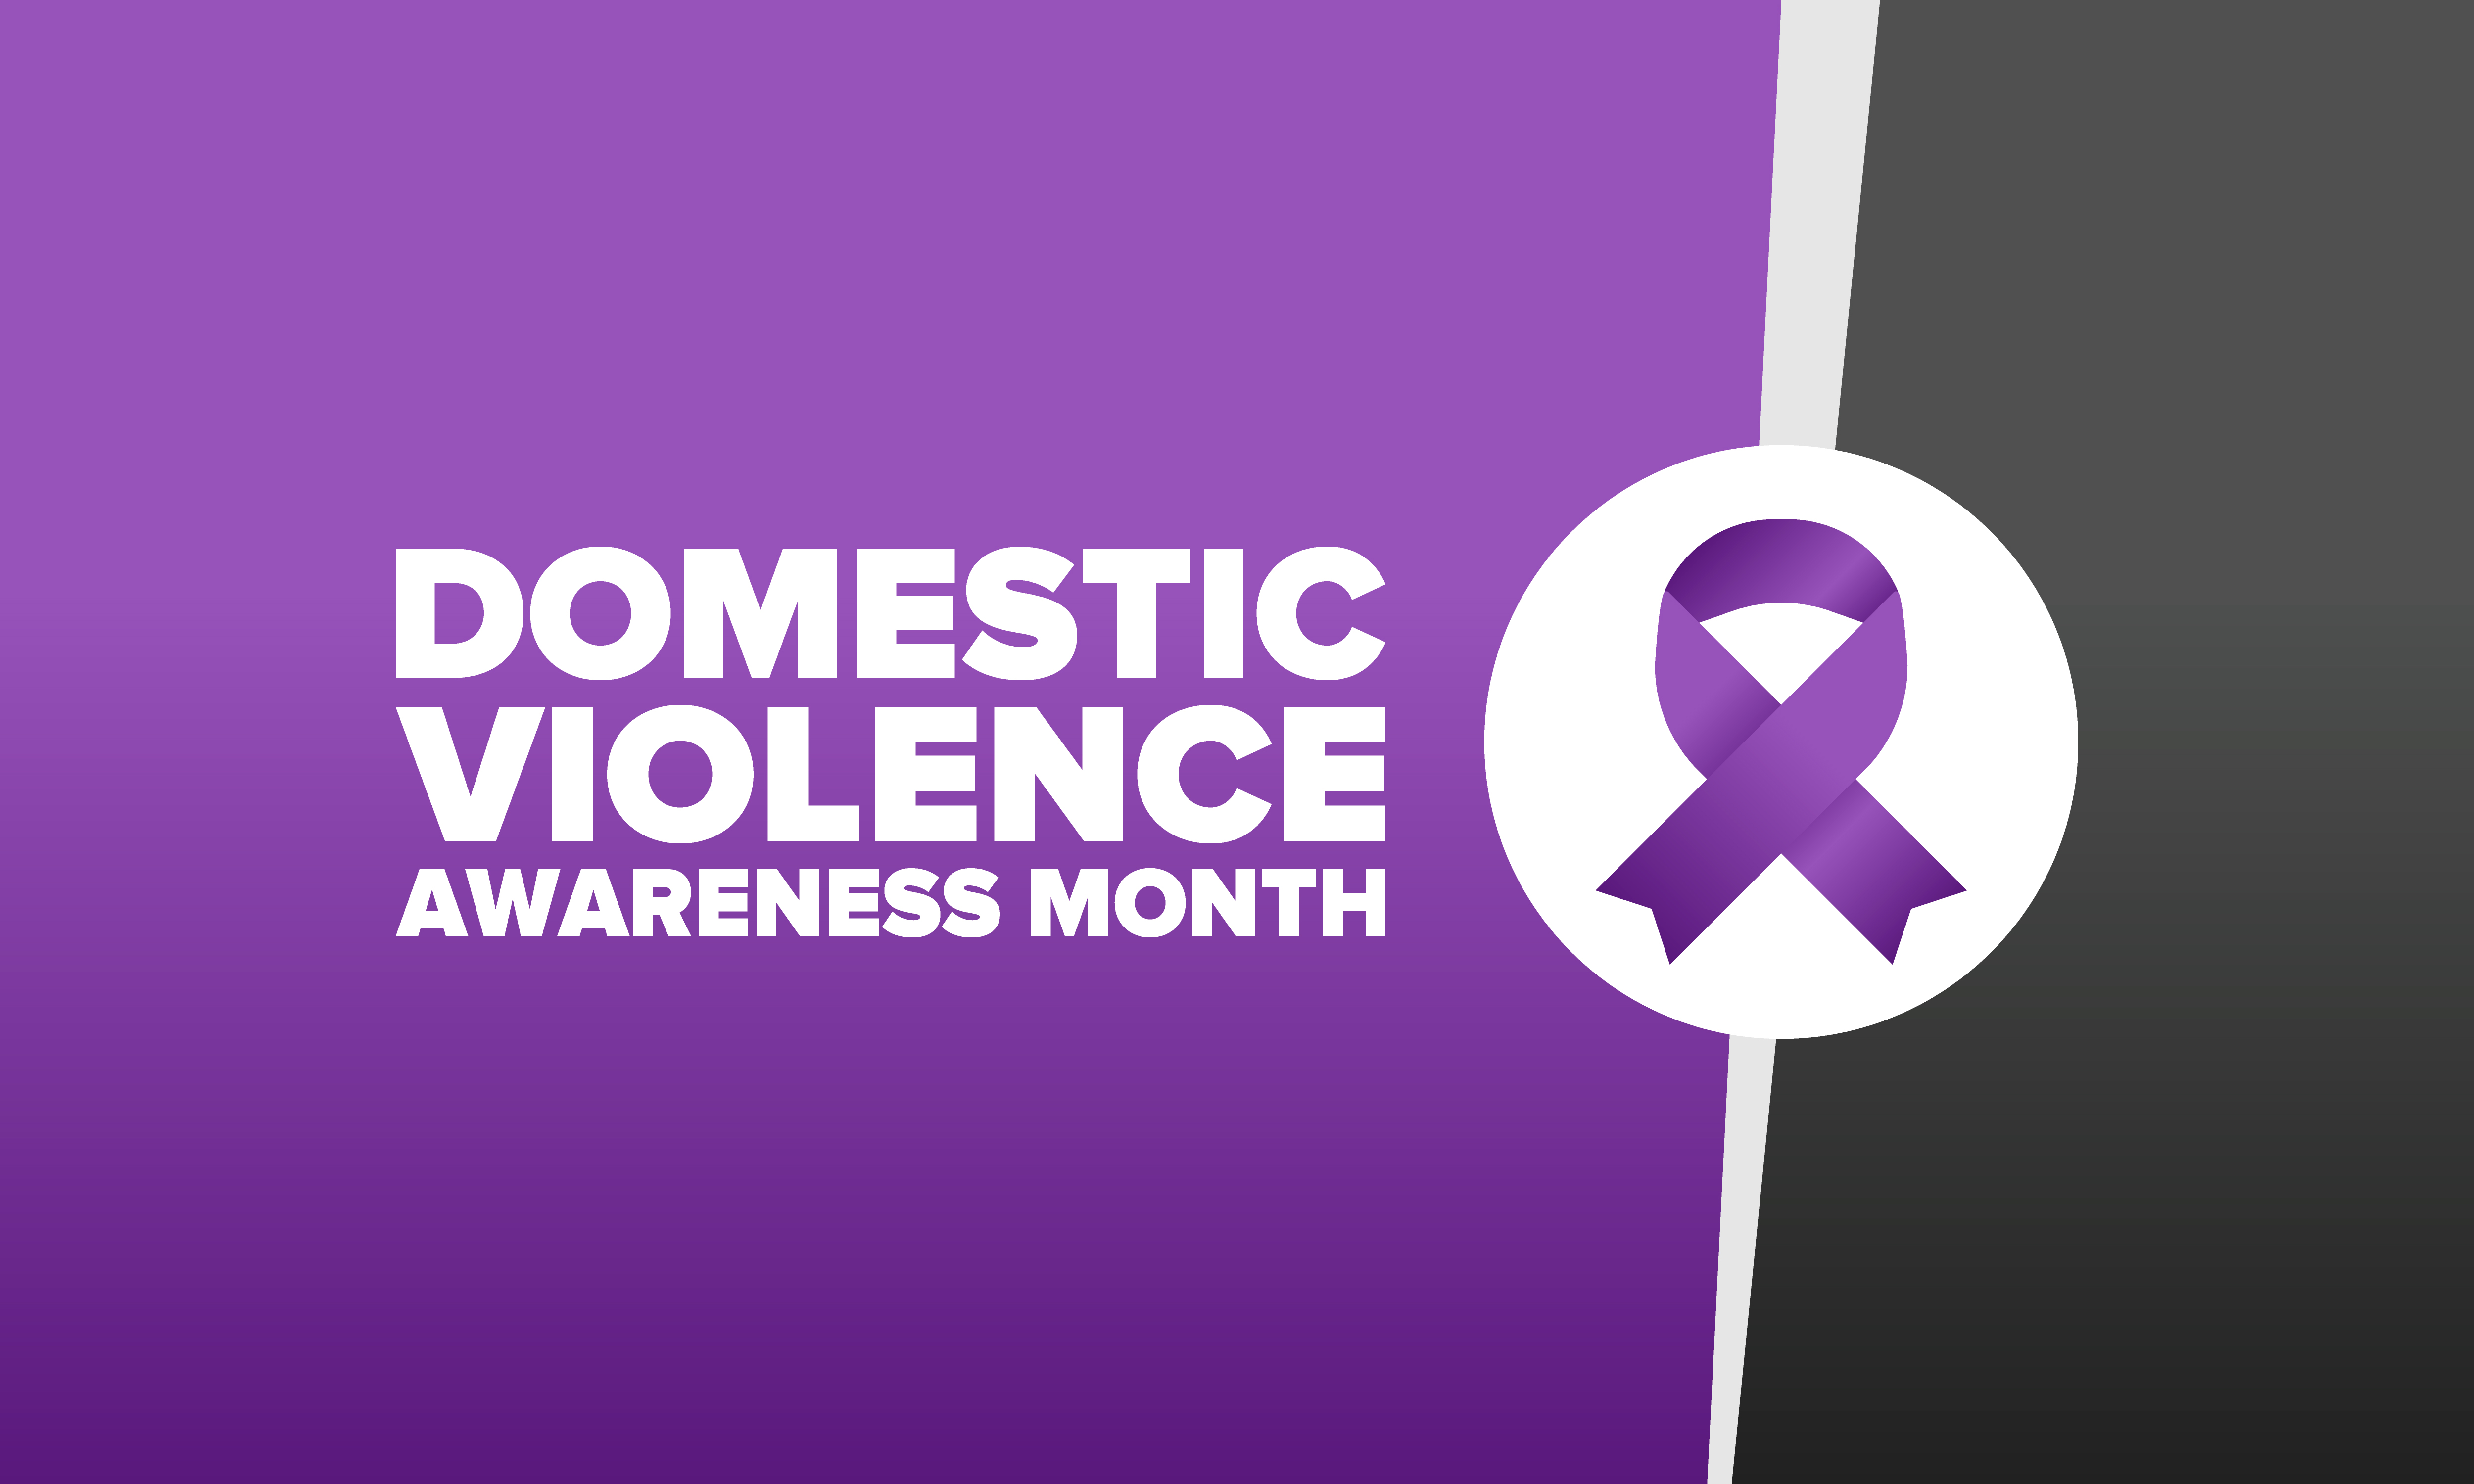 VA resources and support during National Domestic Violence Awareness